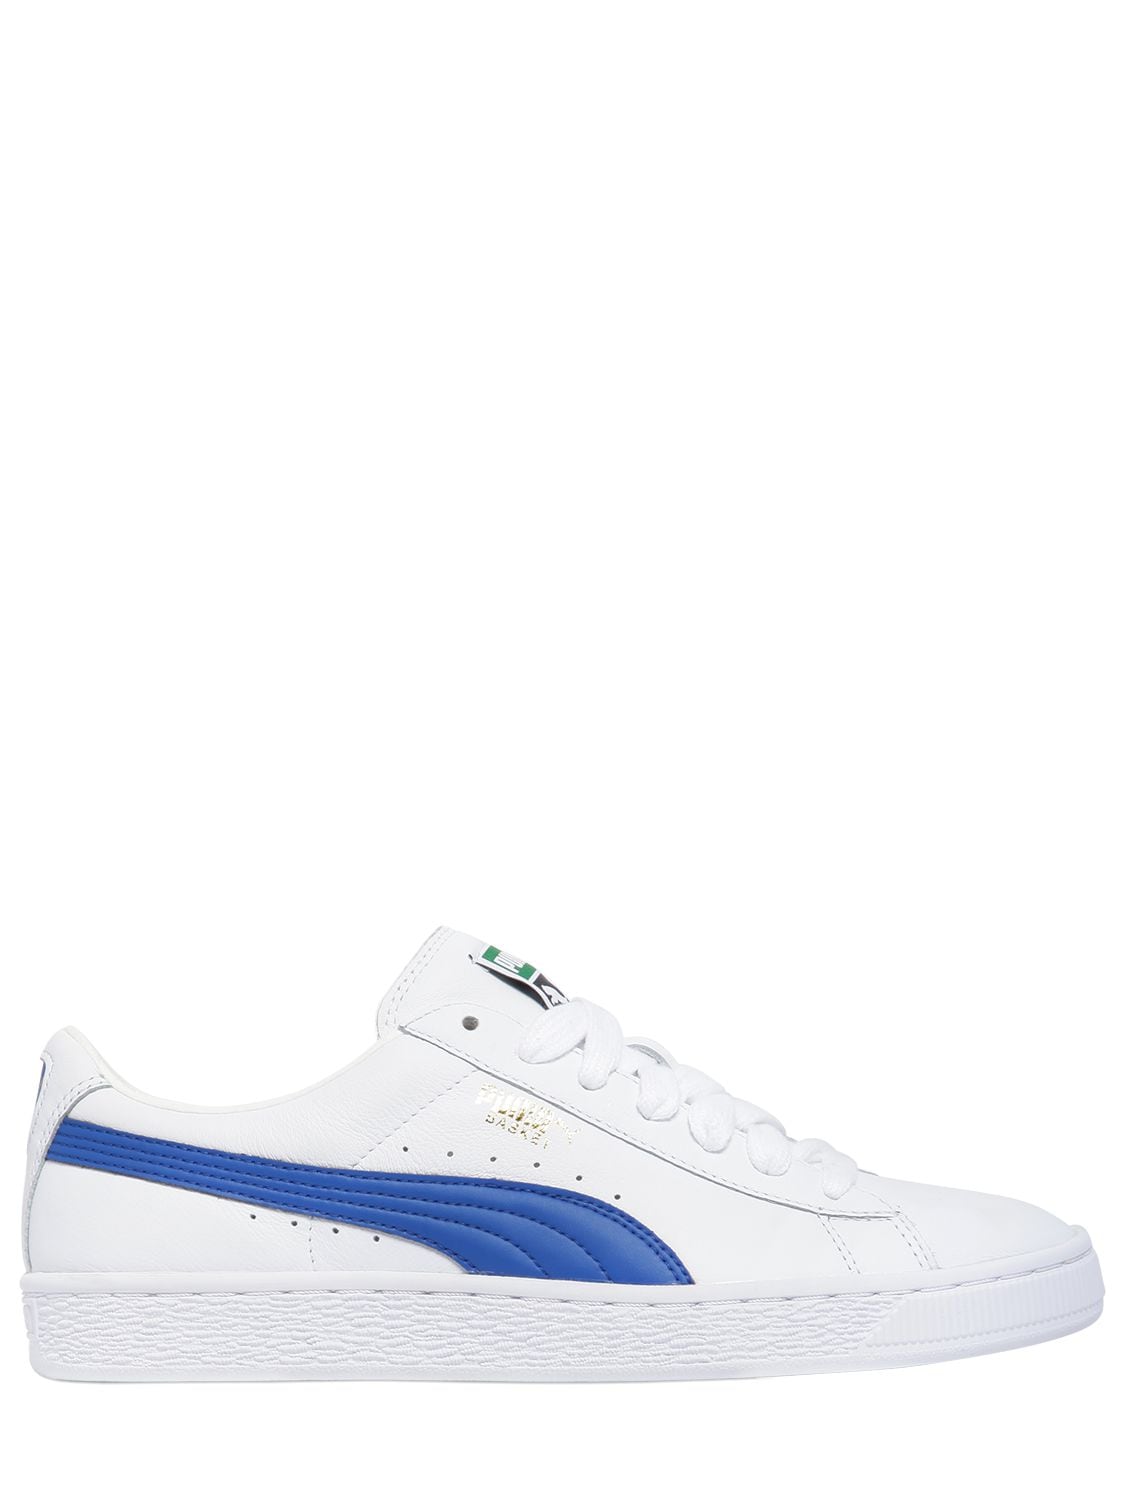 Puma Basket Classic Leather Sneakers In White/blue